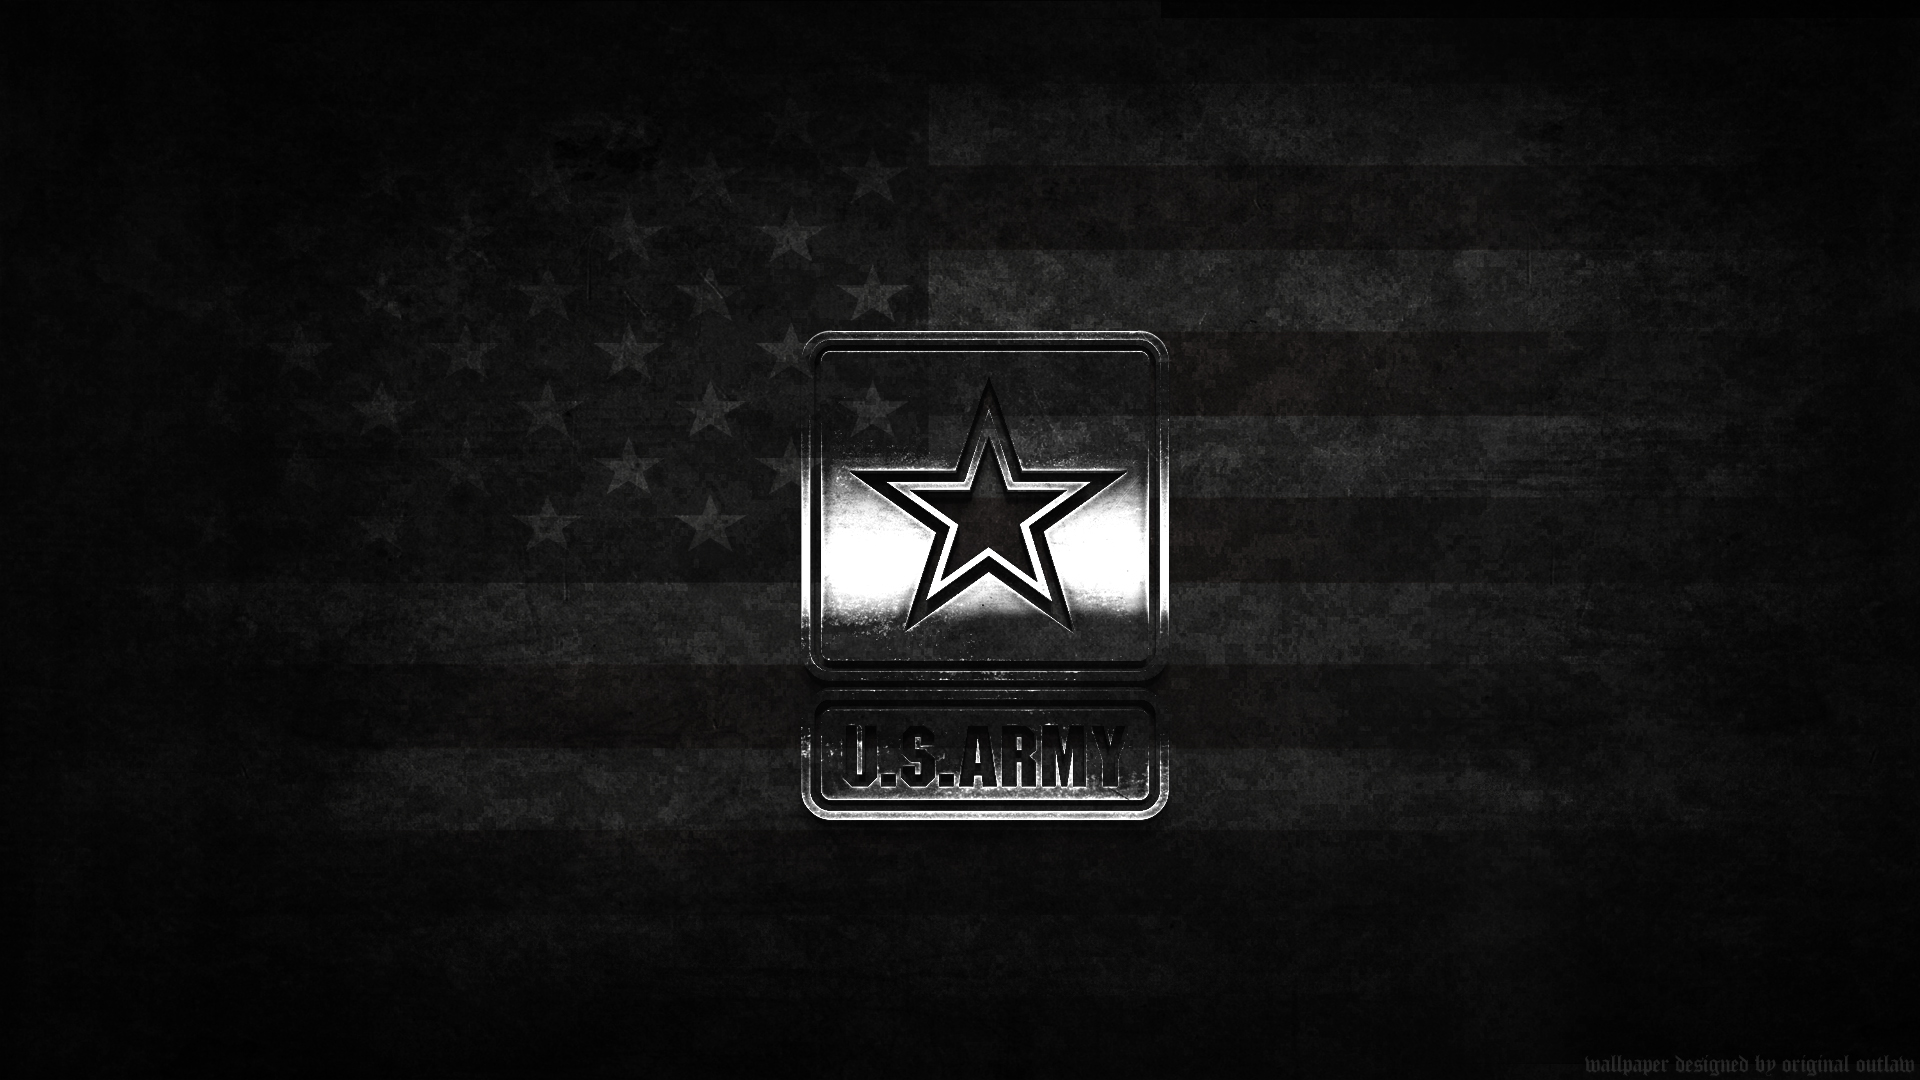 Download image Wallpapers Military Wallpaper United States Army Screen